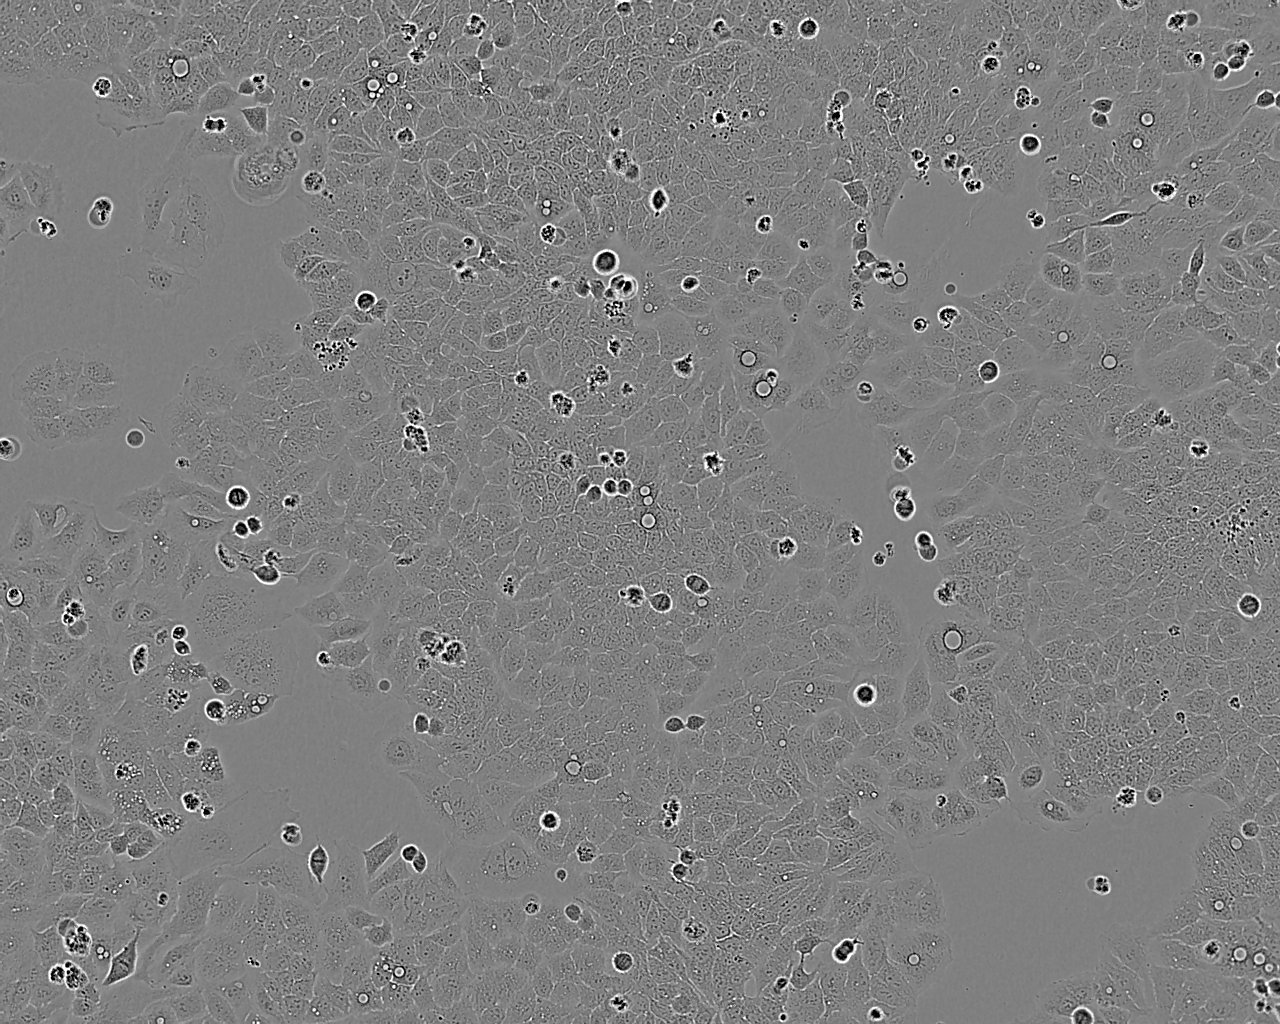 FO [Mouse myeloma] epithelioid cells小鼠骨髓瘤细胞系,FO [Mouse myeloma] epithelioid cells